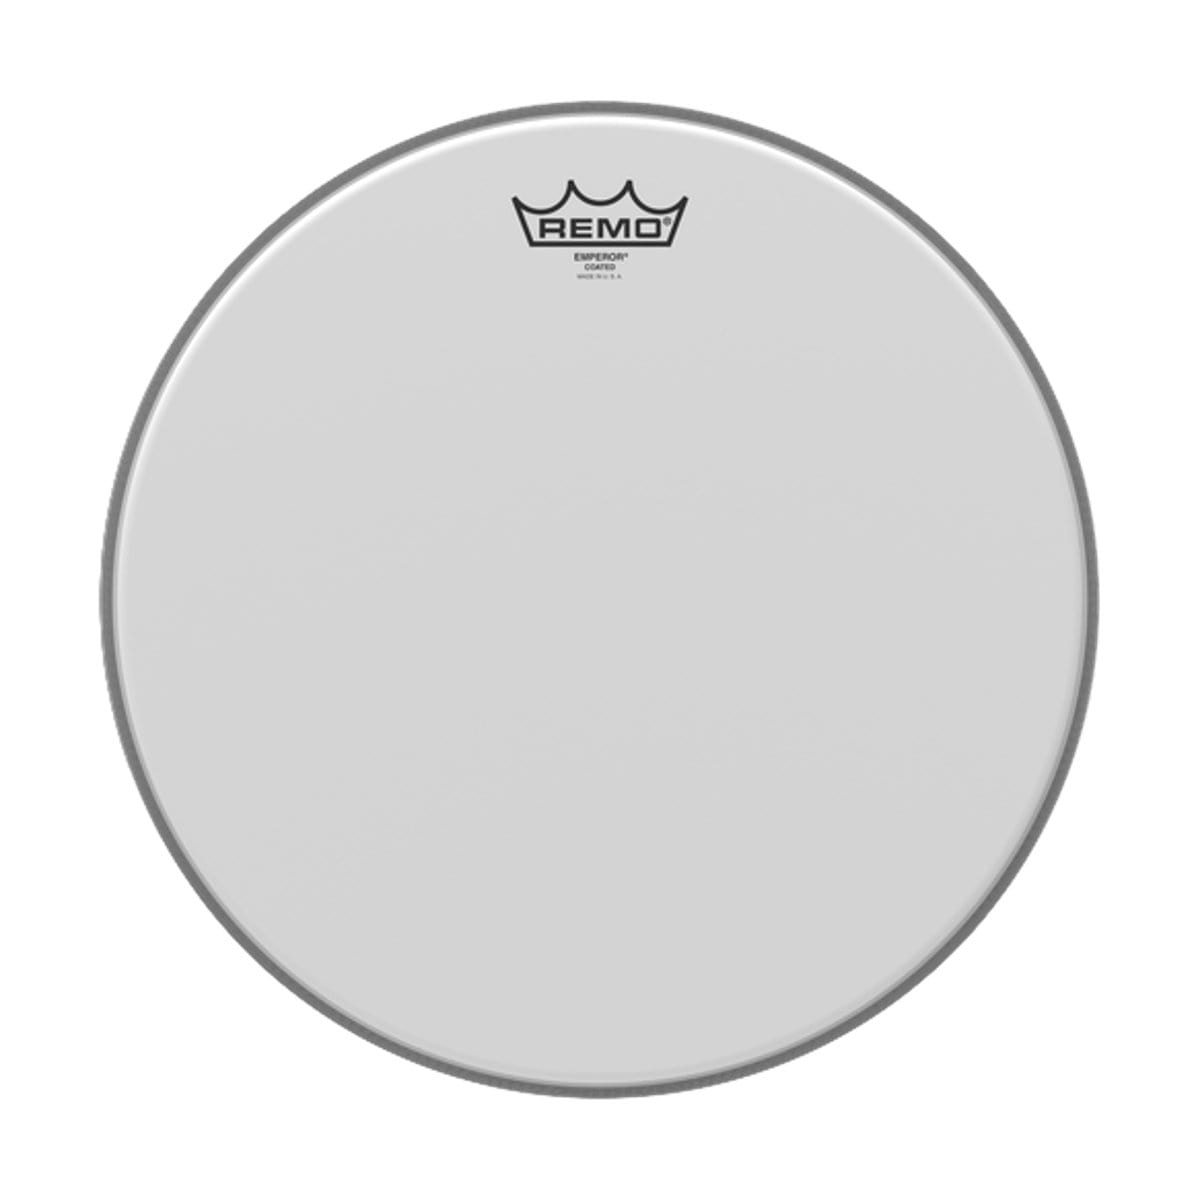 Remo Percussion Remo 14 Inch Drum Head Emperor Coated BE-0114-00 - Byron Music